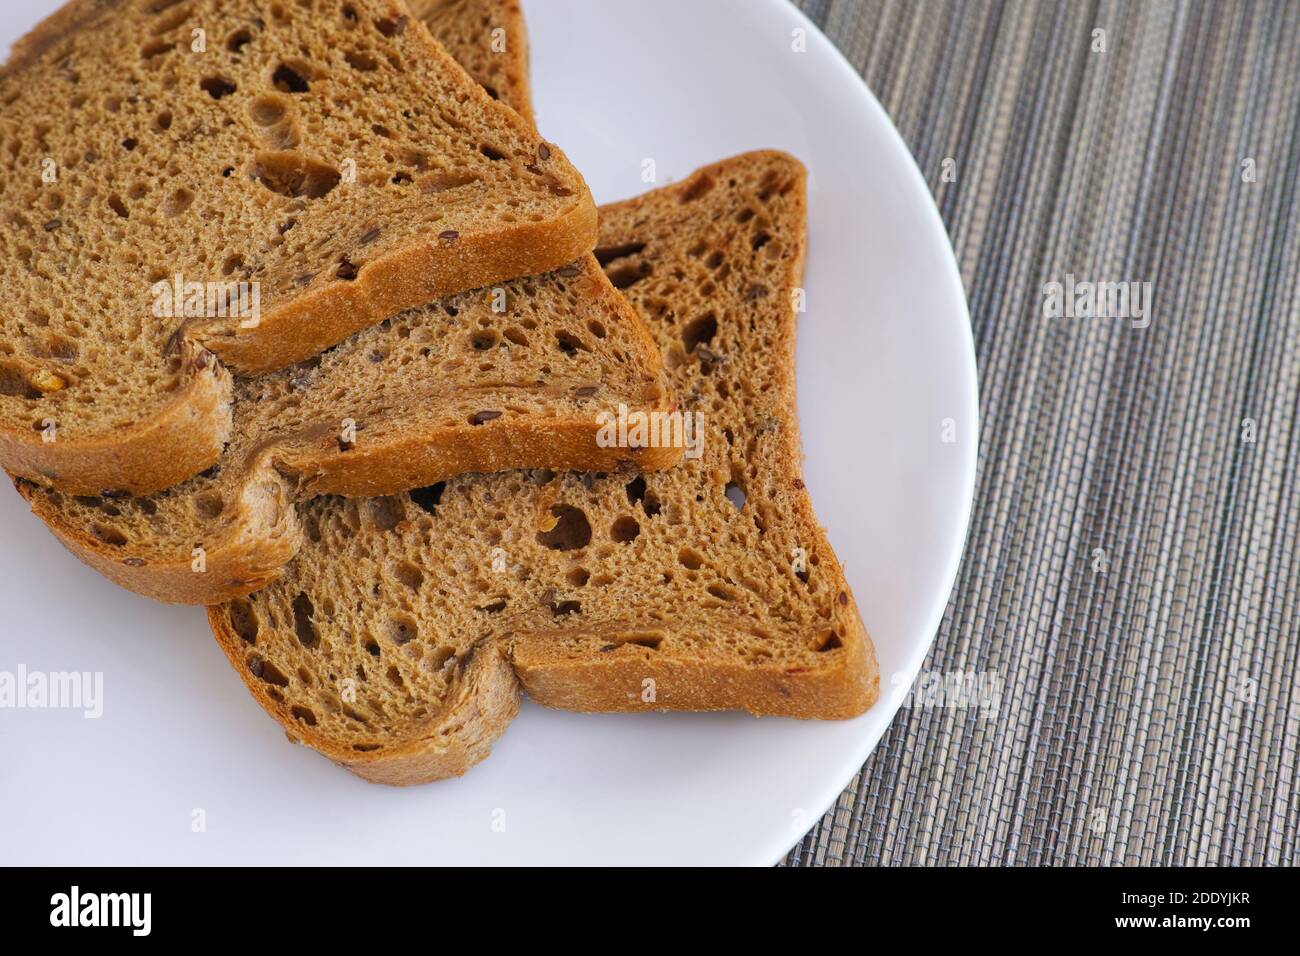 Slices of whole grain gluten free bread on a plate. Close up. Stock Photo